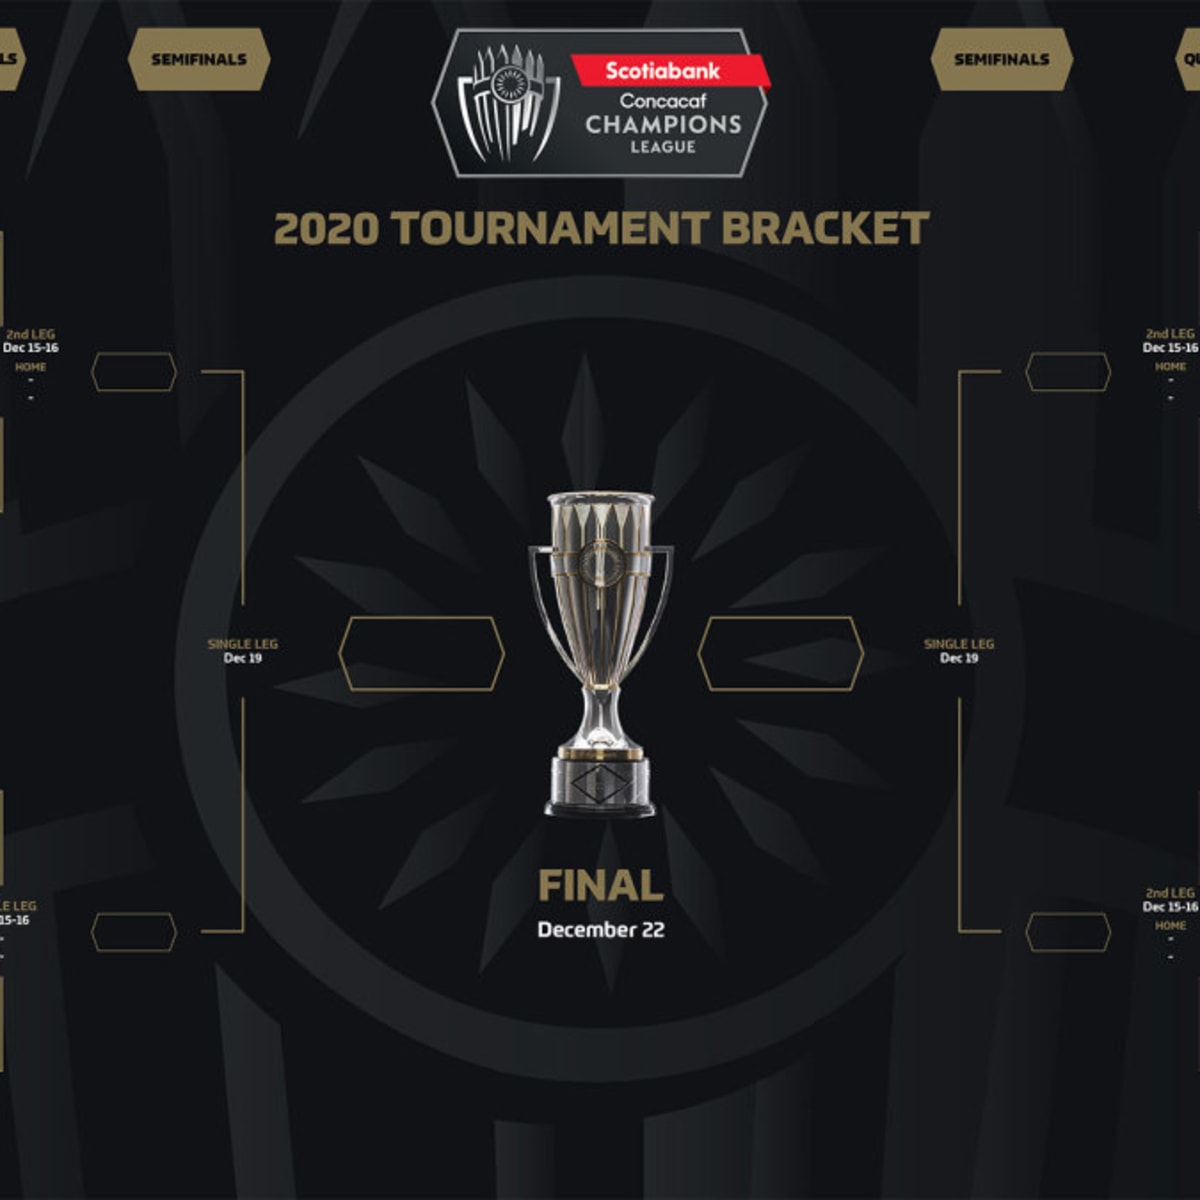 Schedule Announced For 2023 Scotiabank Concacaf Champions League  Quarterfinals